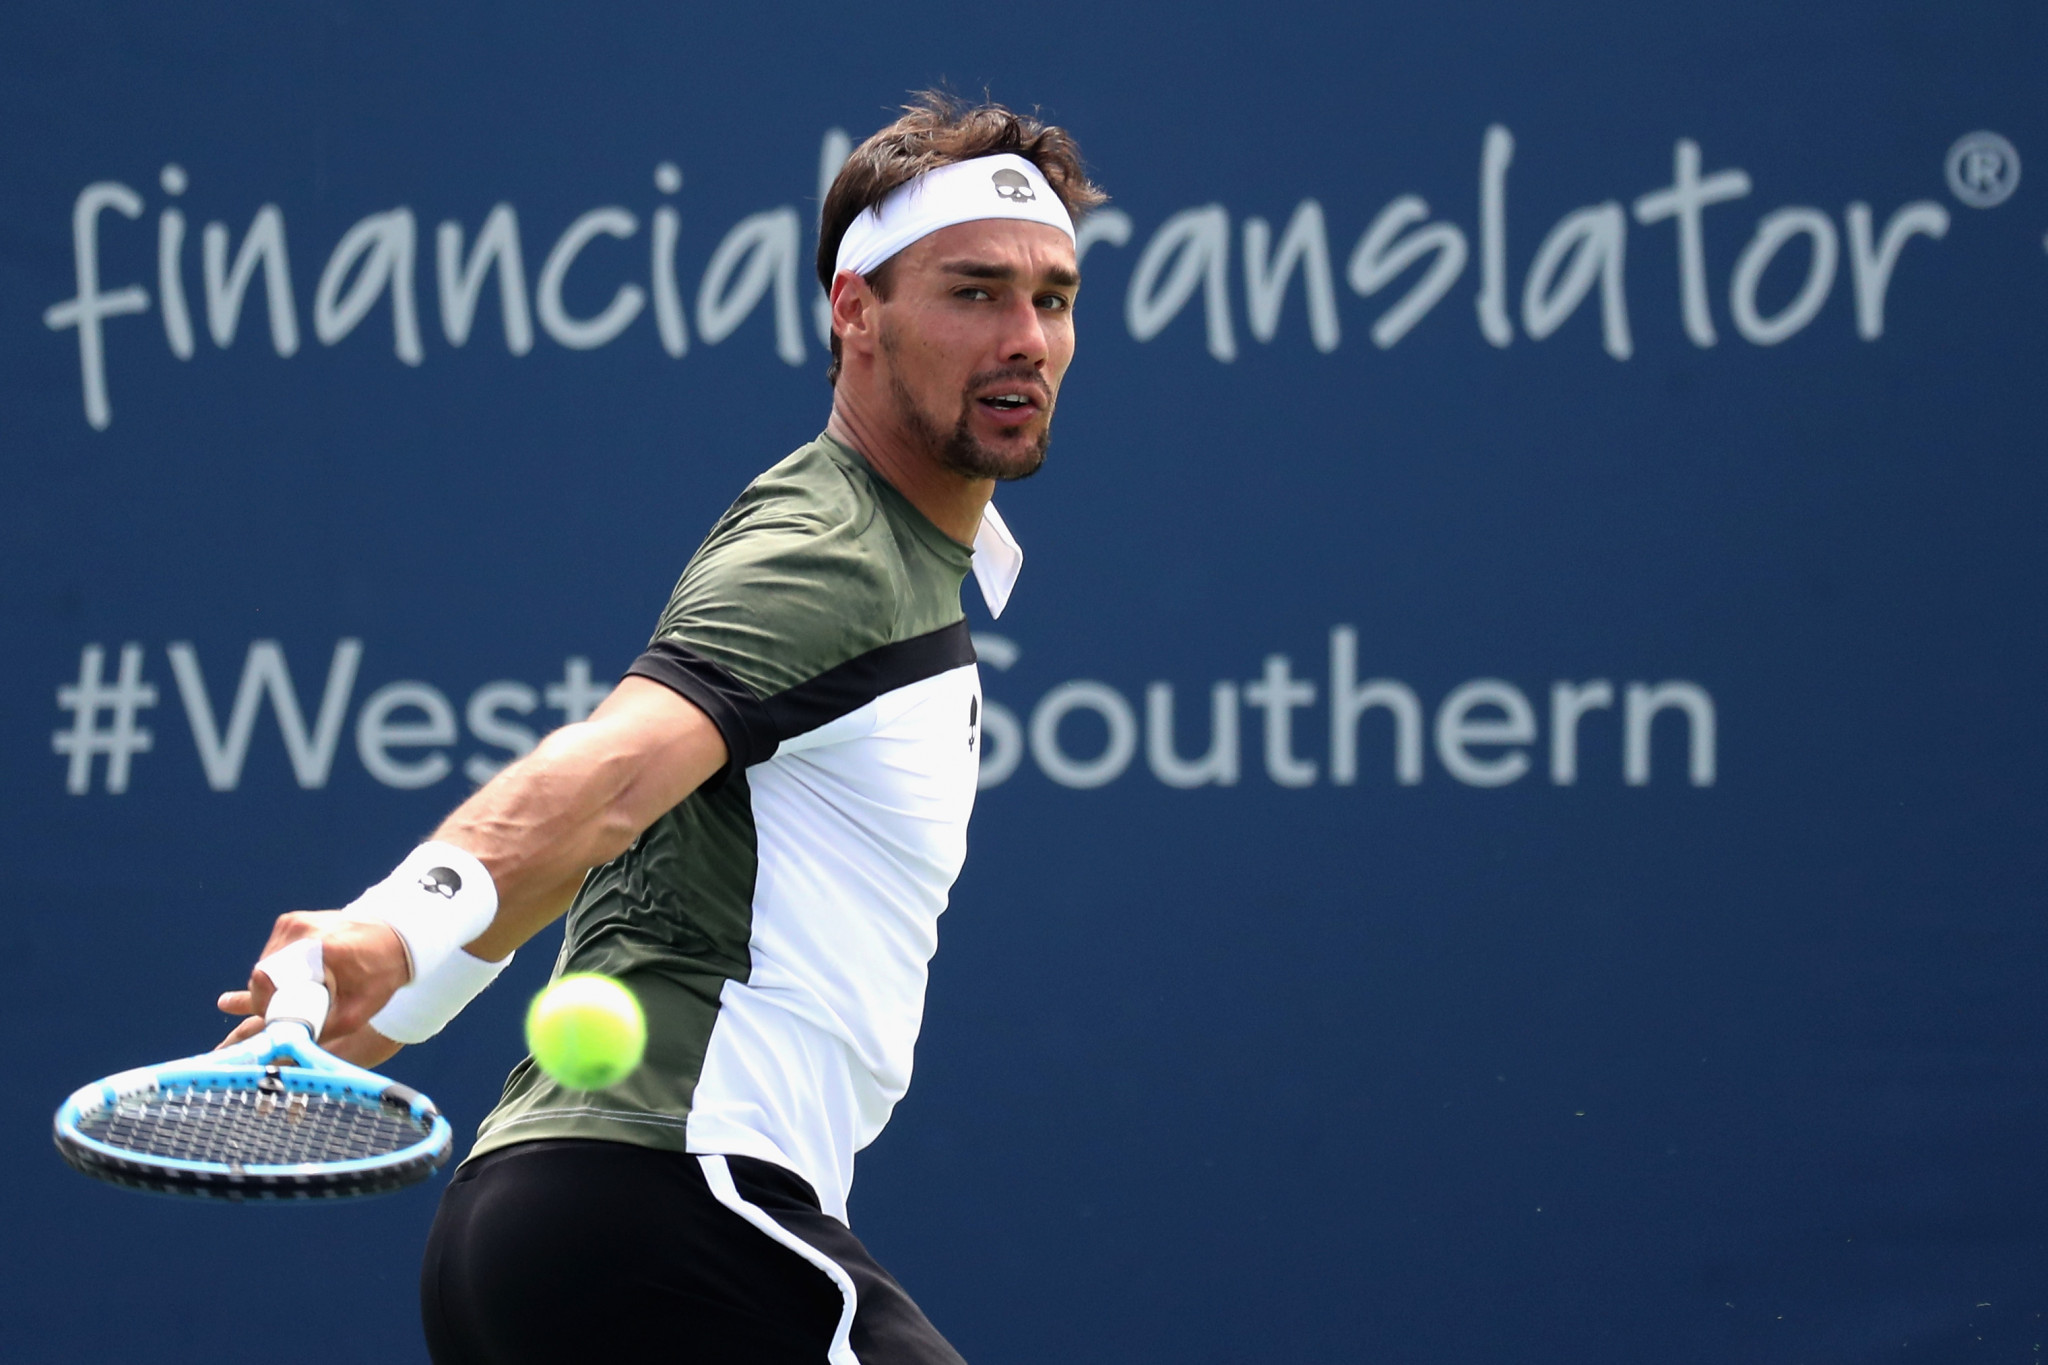 Italy’s Fabio Fognini has been provisionally suspended from the US Open after verbally abusing a female umpire ©Getty Images